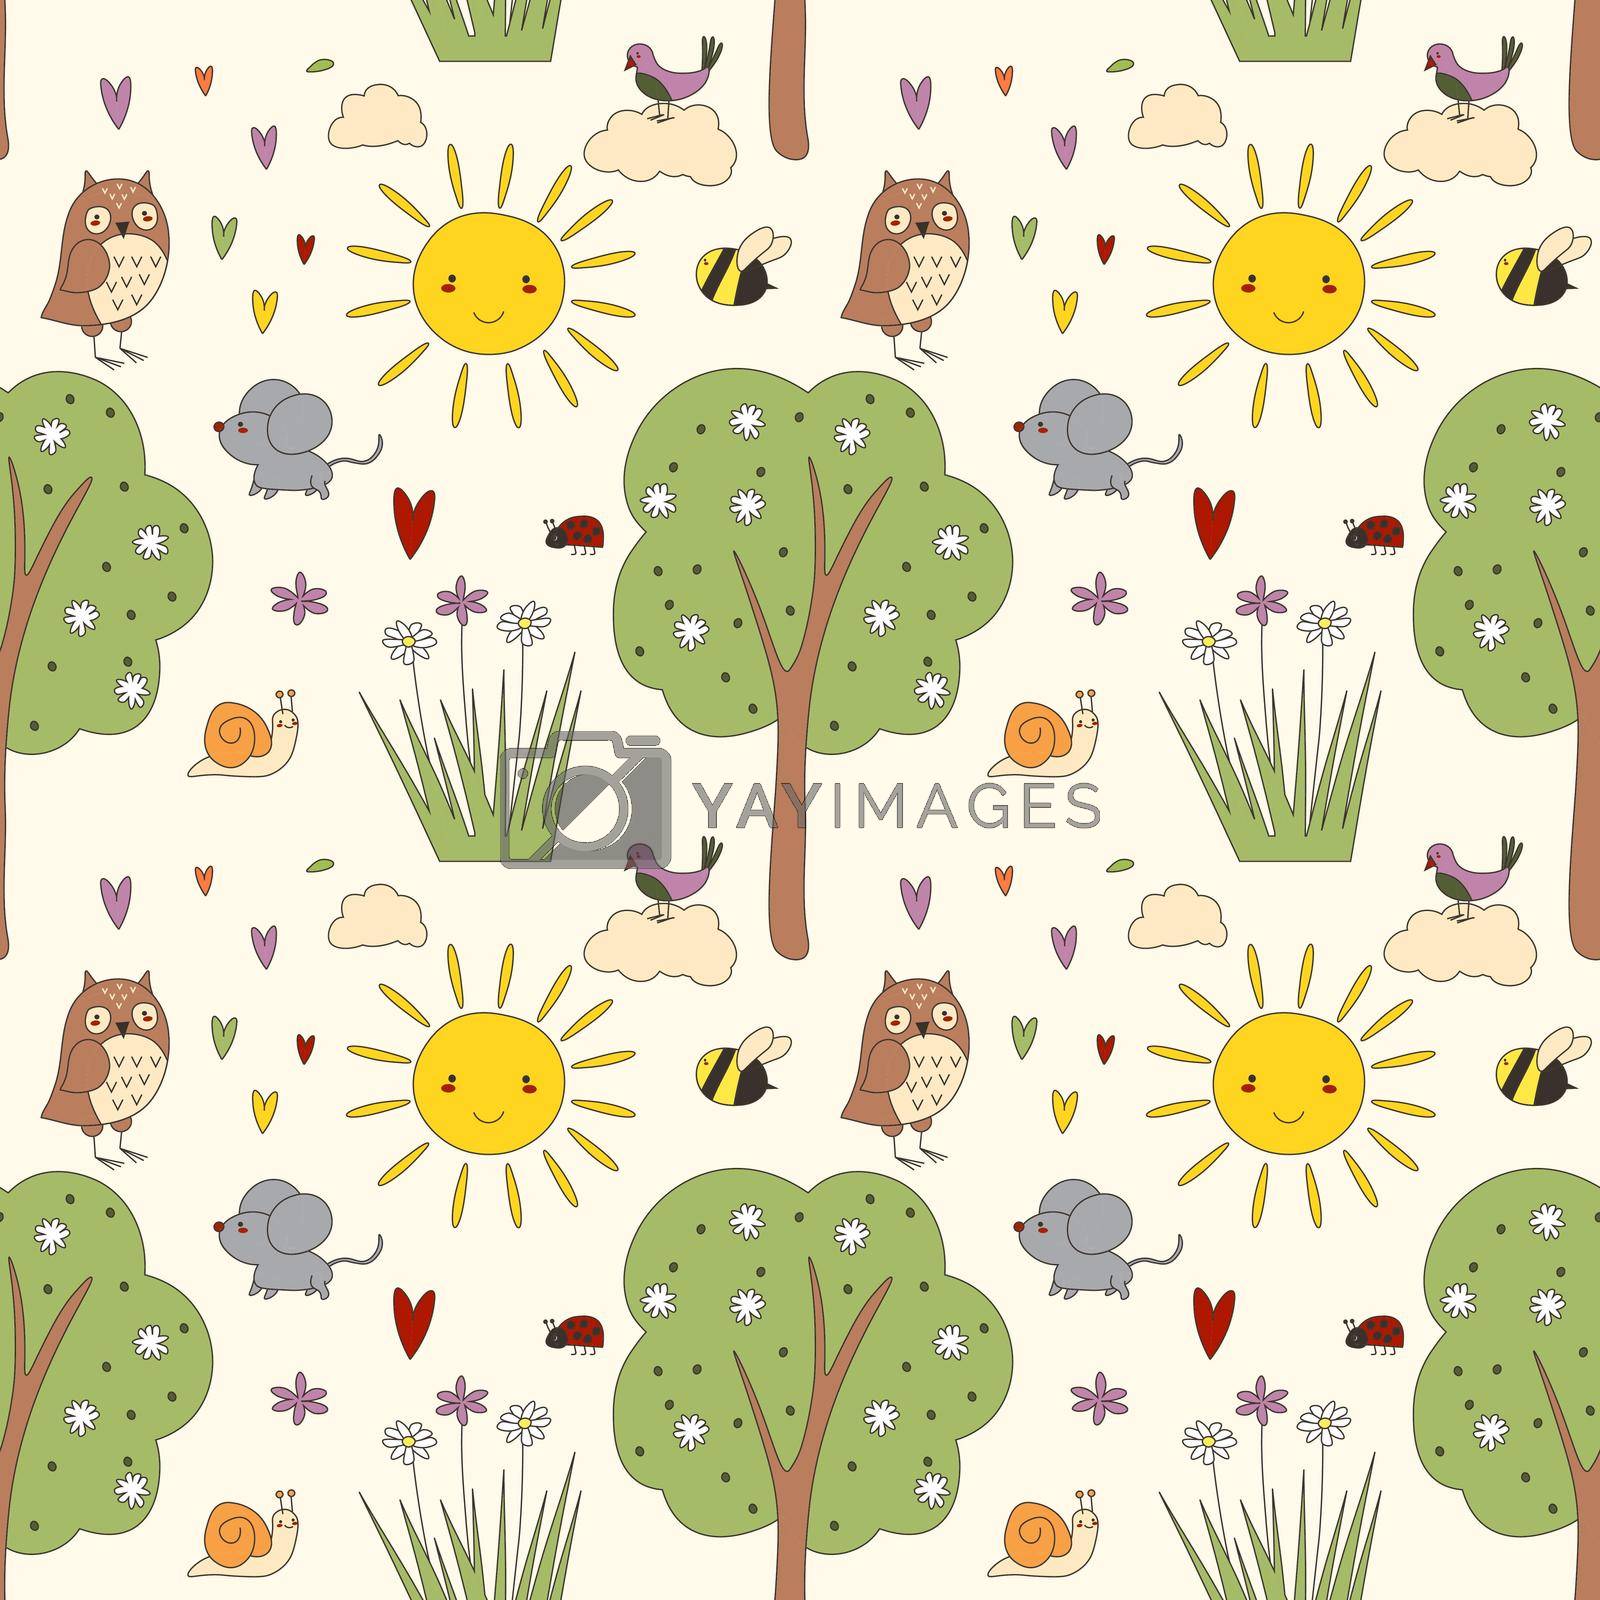 Seamless pattern of cute woodland animals and birds with autumn floral elements